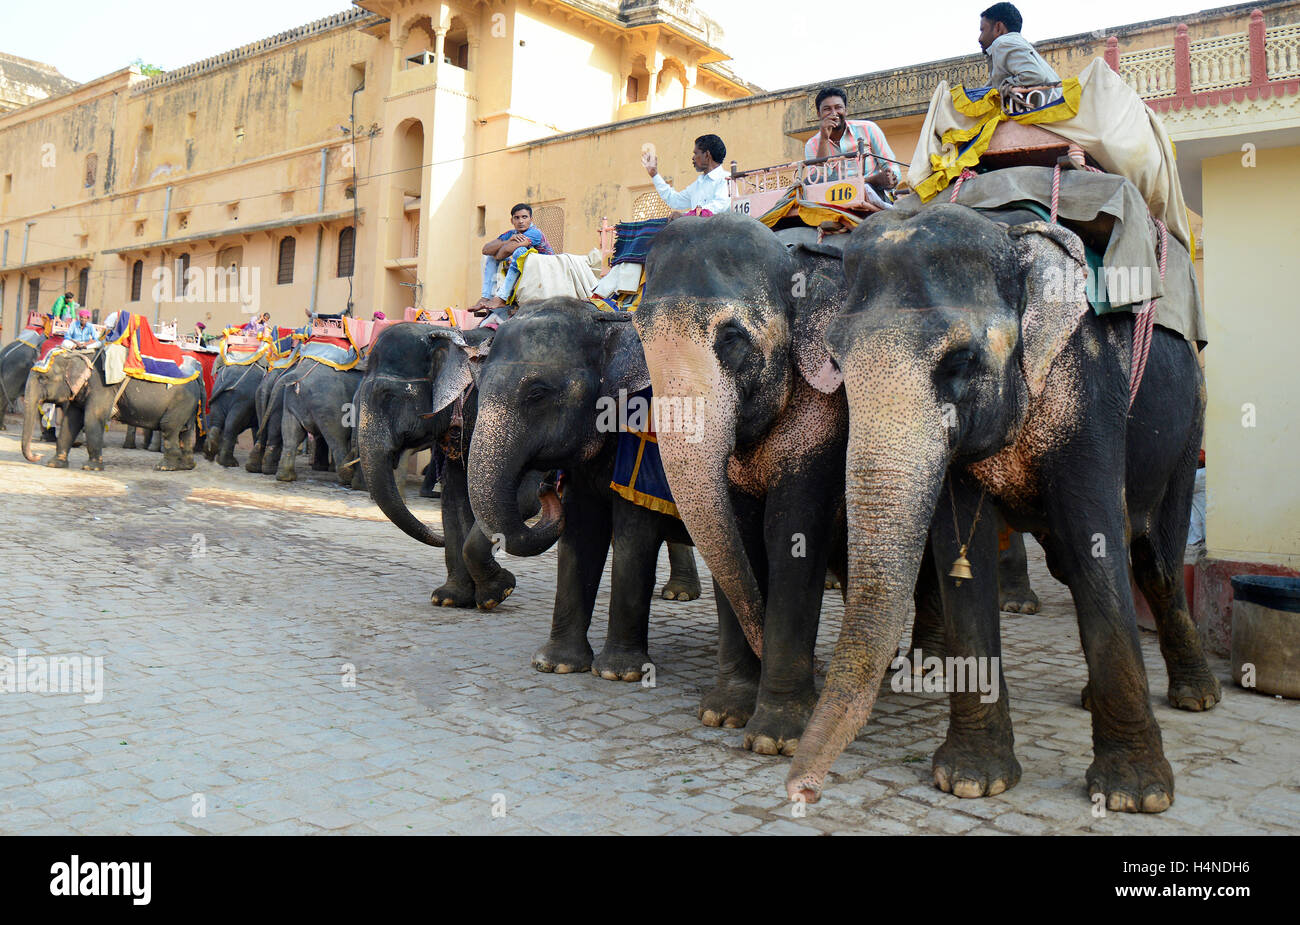 Mahout riding decorated Indian elephant at Amber fort,Jaipur,Rajasthan,India Stock Photo